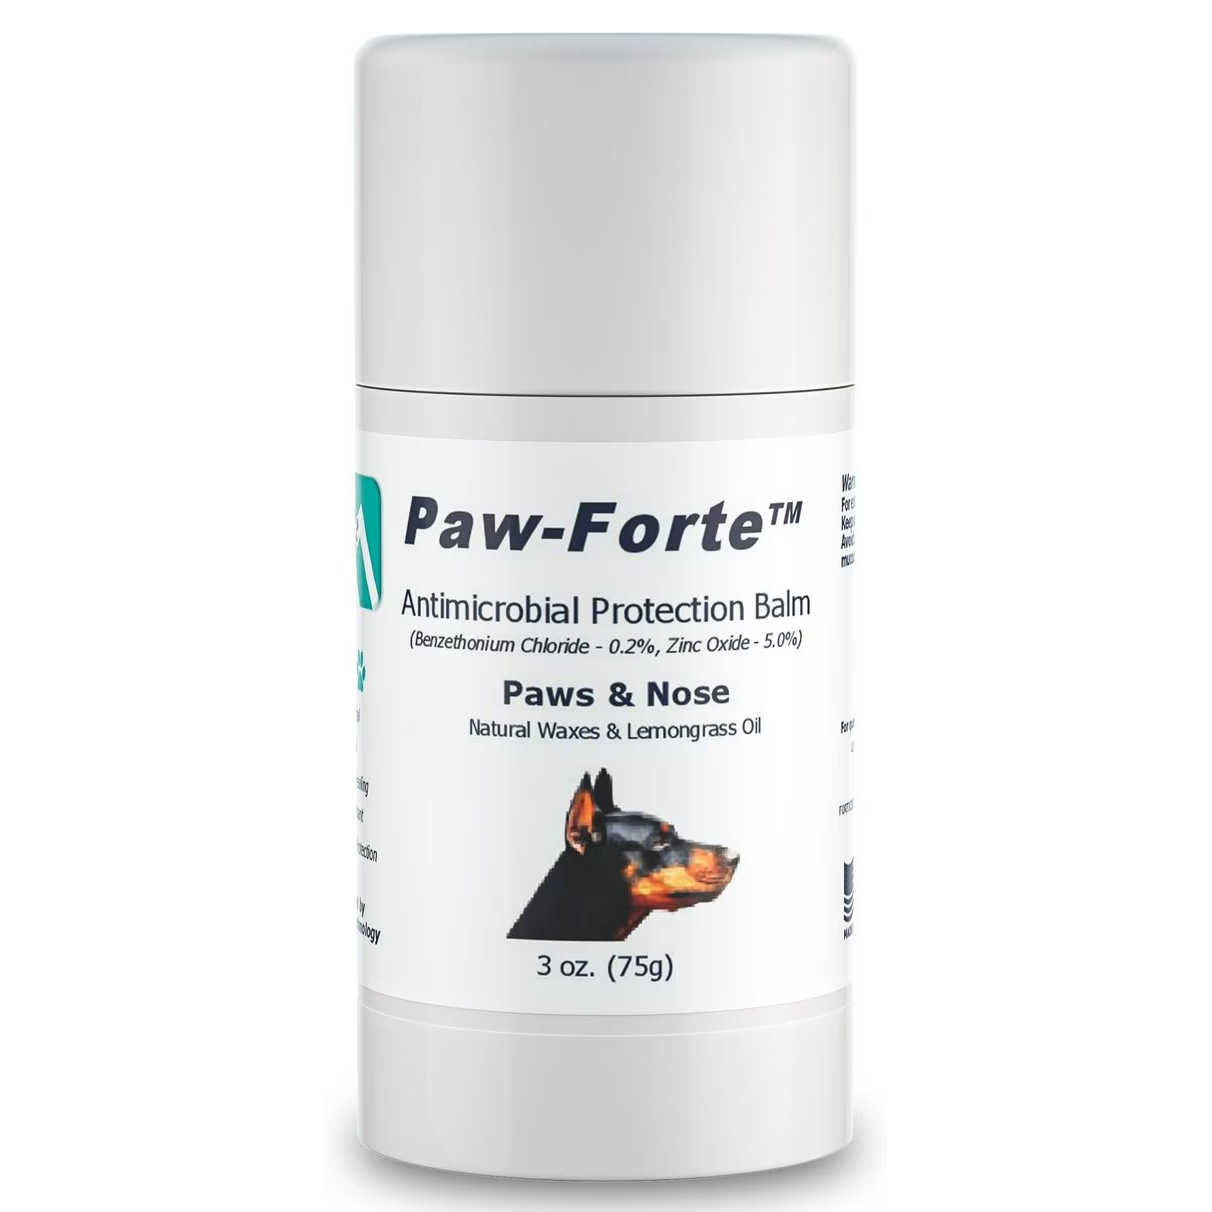 Forticept Paw-Forte Antimicrobial Protection Balm